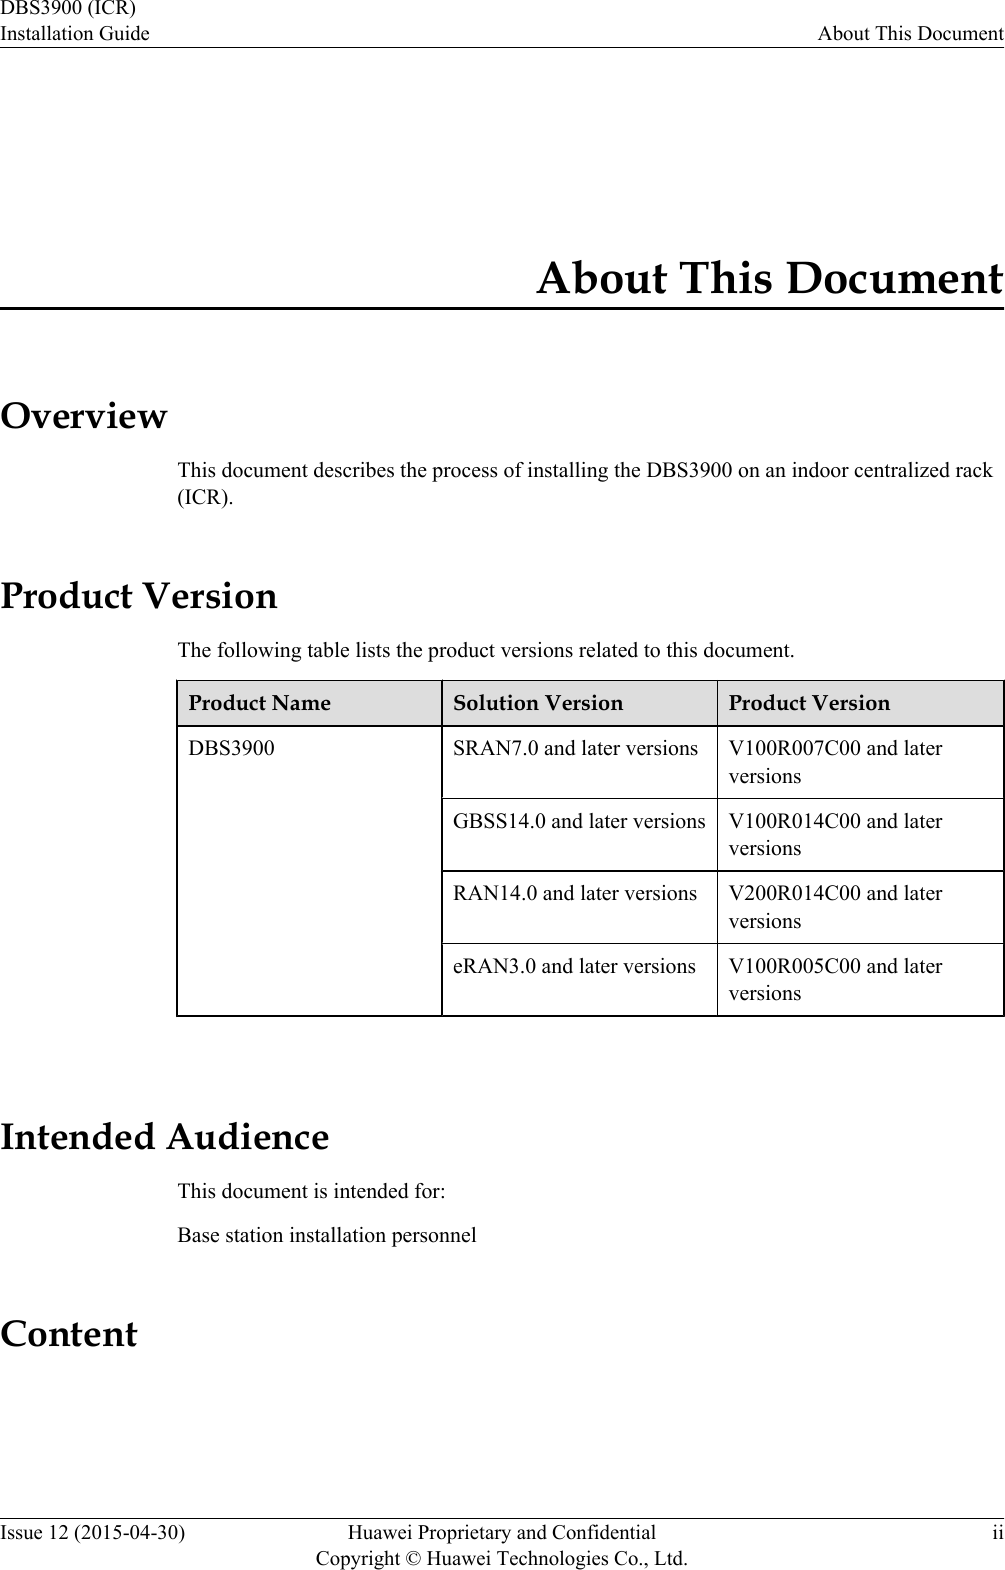 About This DocumentOverviewThis document describes the process of installing the DBS3900 on an indoor centralized rack(ICR).Product VersionThe following table lists the product versions related to this document.Product Name Solution Version Product VersionDBS3900 SRAN7.0 and later versions V100R007C00 and laterversionsGBSS14.0 and later versions V100R014C00 and laterversionsRAN14.0 and later versions V200R014C00 and laterversionseRAN3.0 and later versions V100R005C00 and laterversions Intended AudienceThis document is intended for:Base station installation personnelContentDBS3900 (ICR)Installation Guide About This DocumentIssue 12 (2015-04-30) Huawei Proprietary and ConfidentialCopyright © Huawei Technologies Co., Ltd.ii